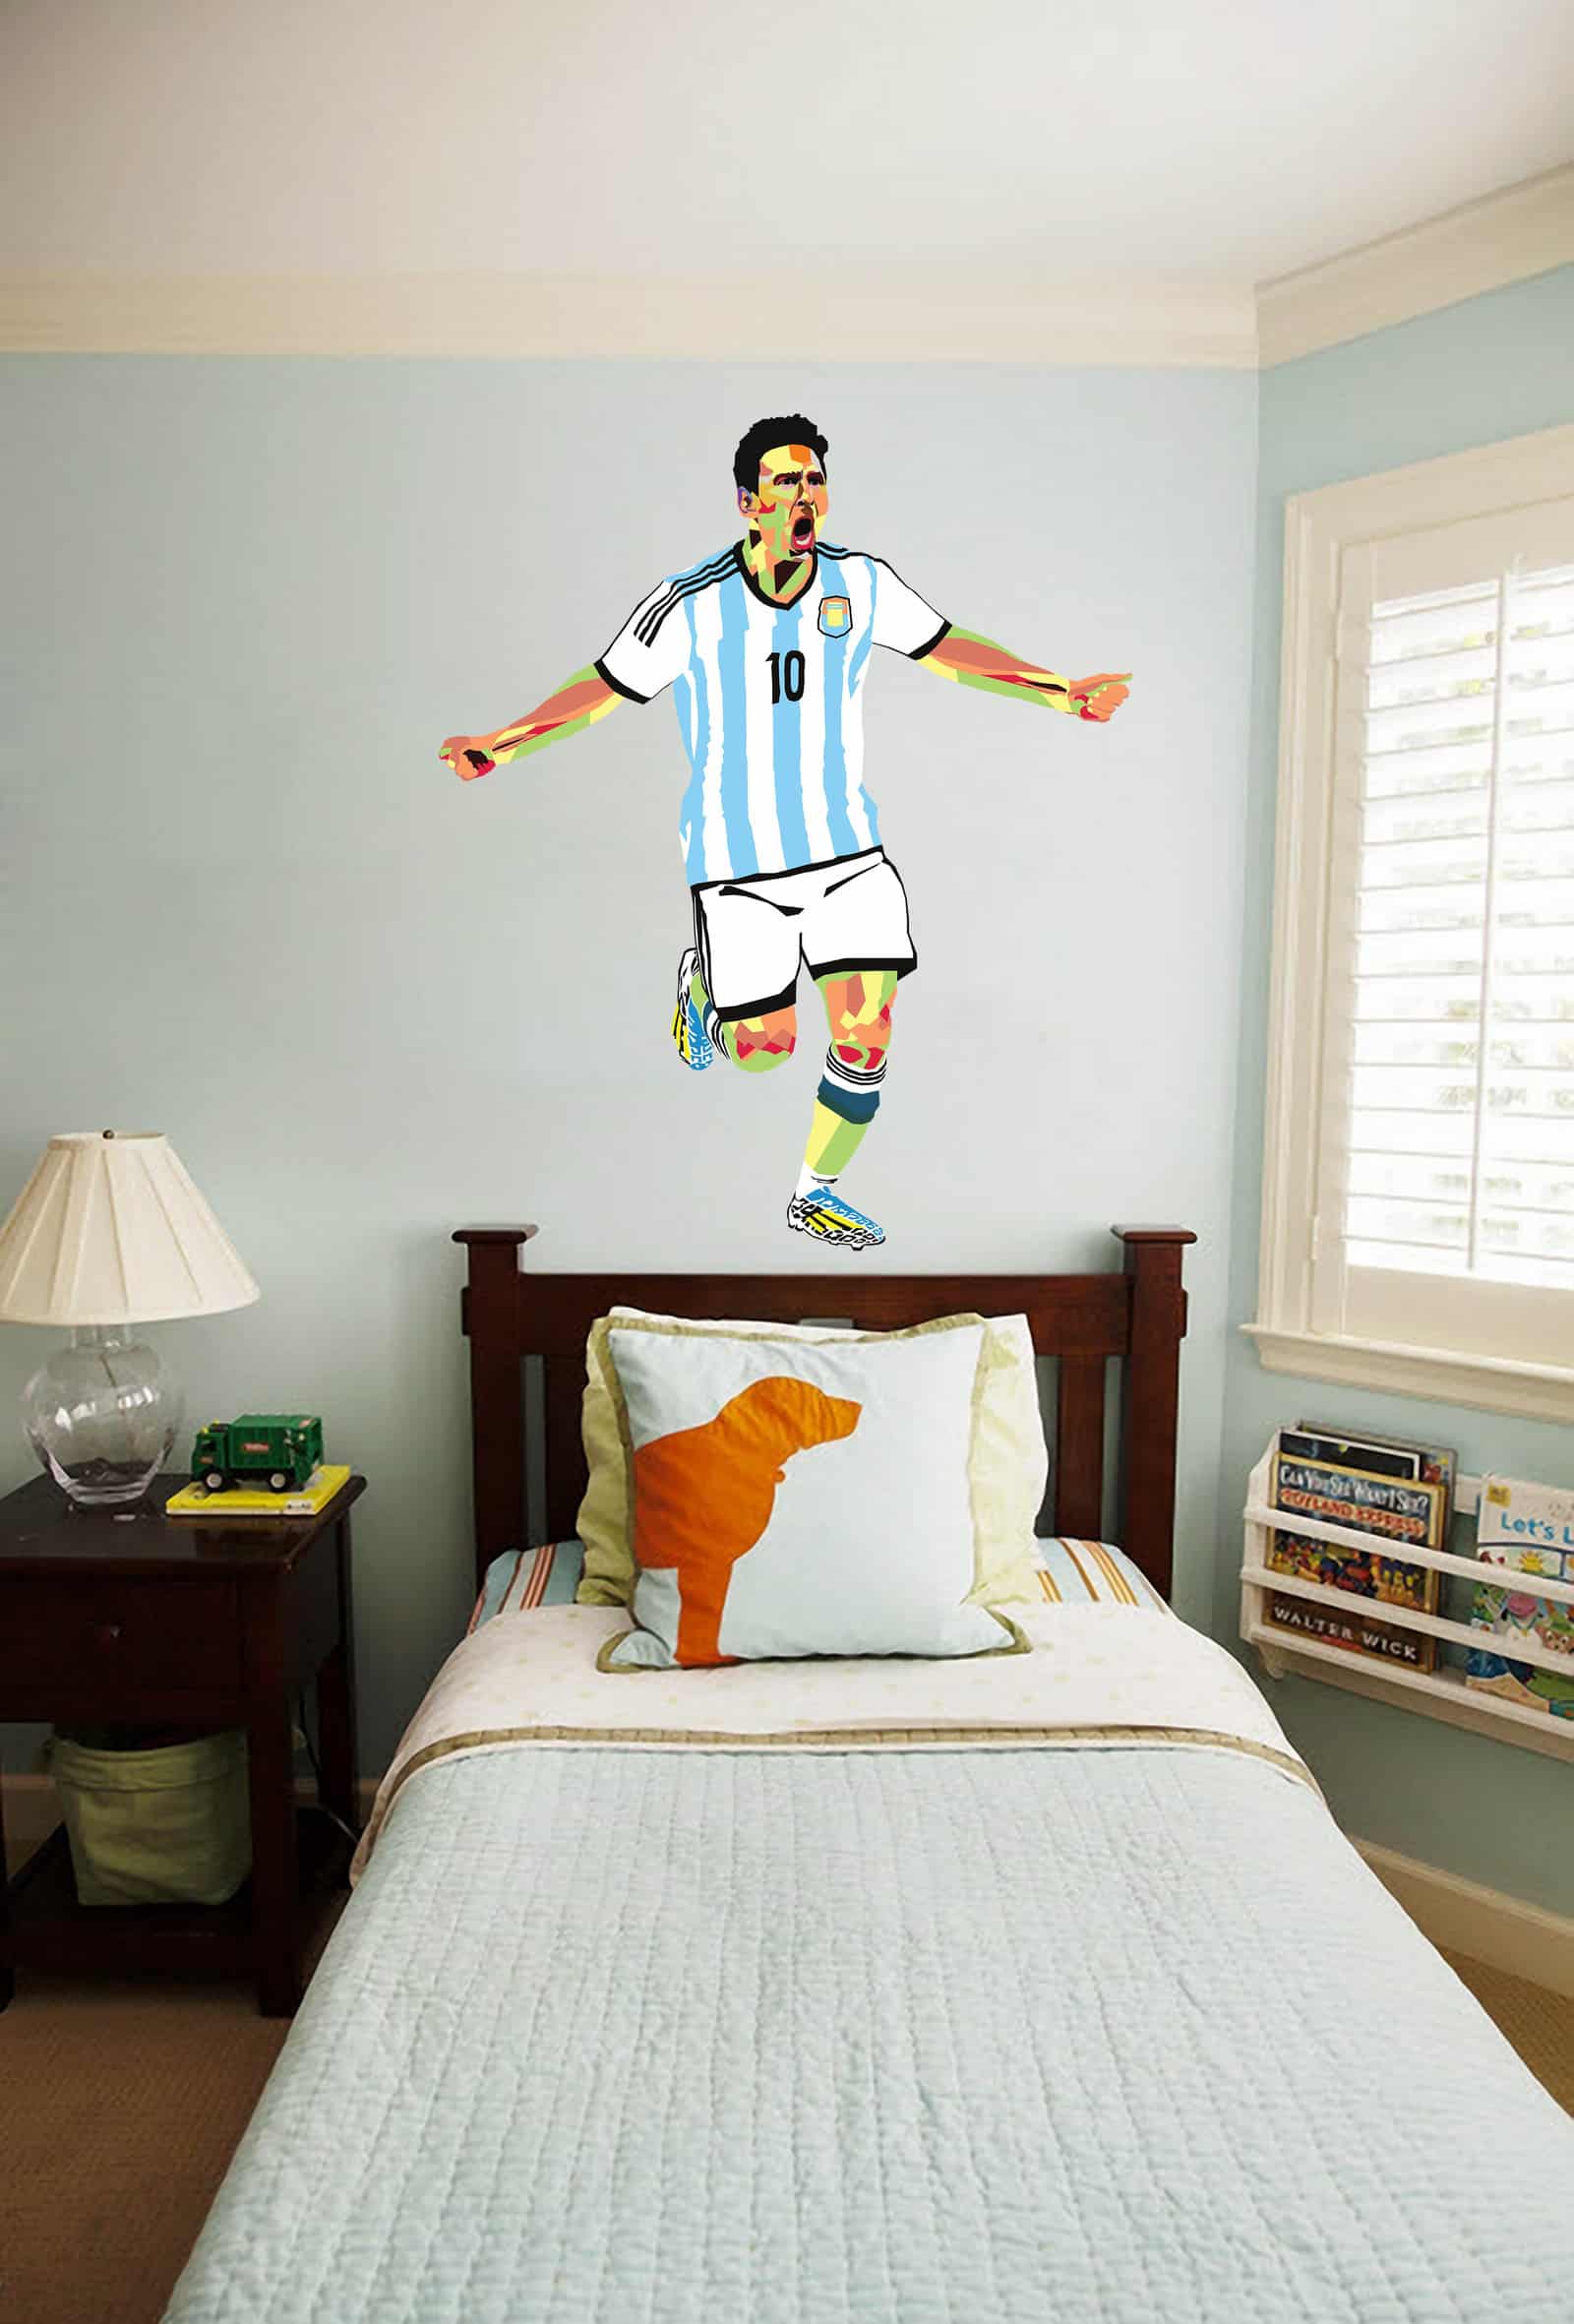 Come on Messi Wall Sticker